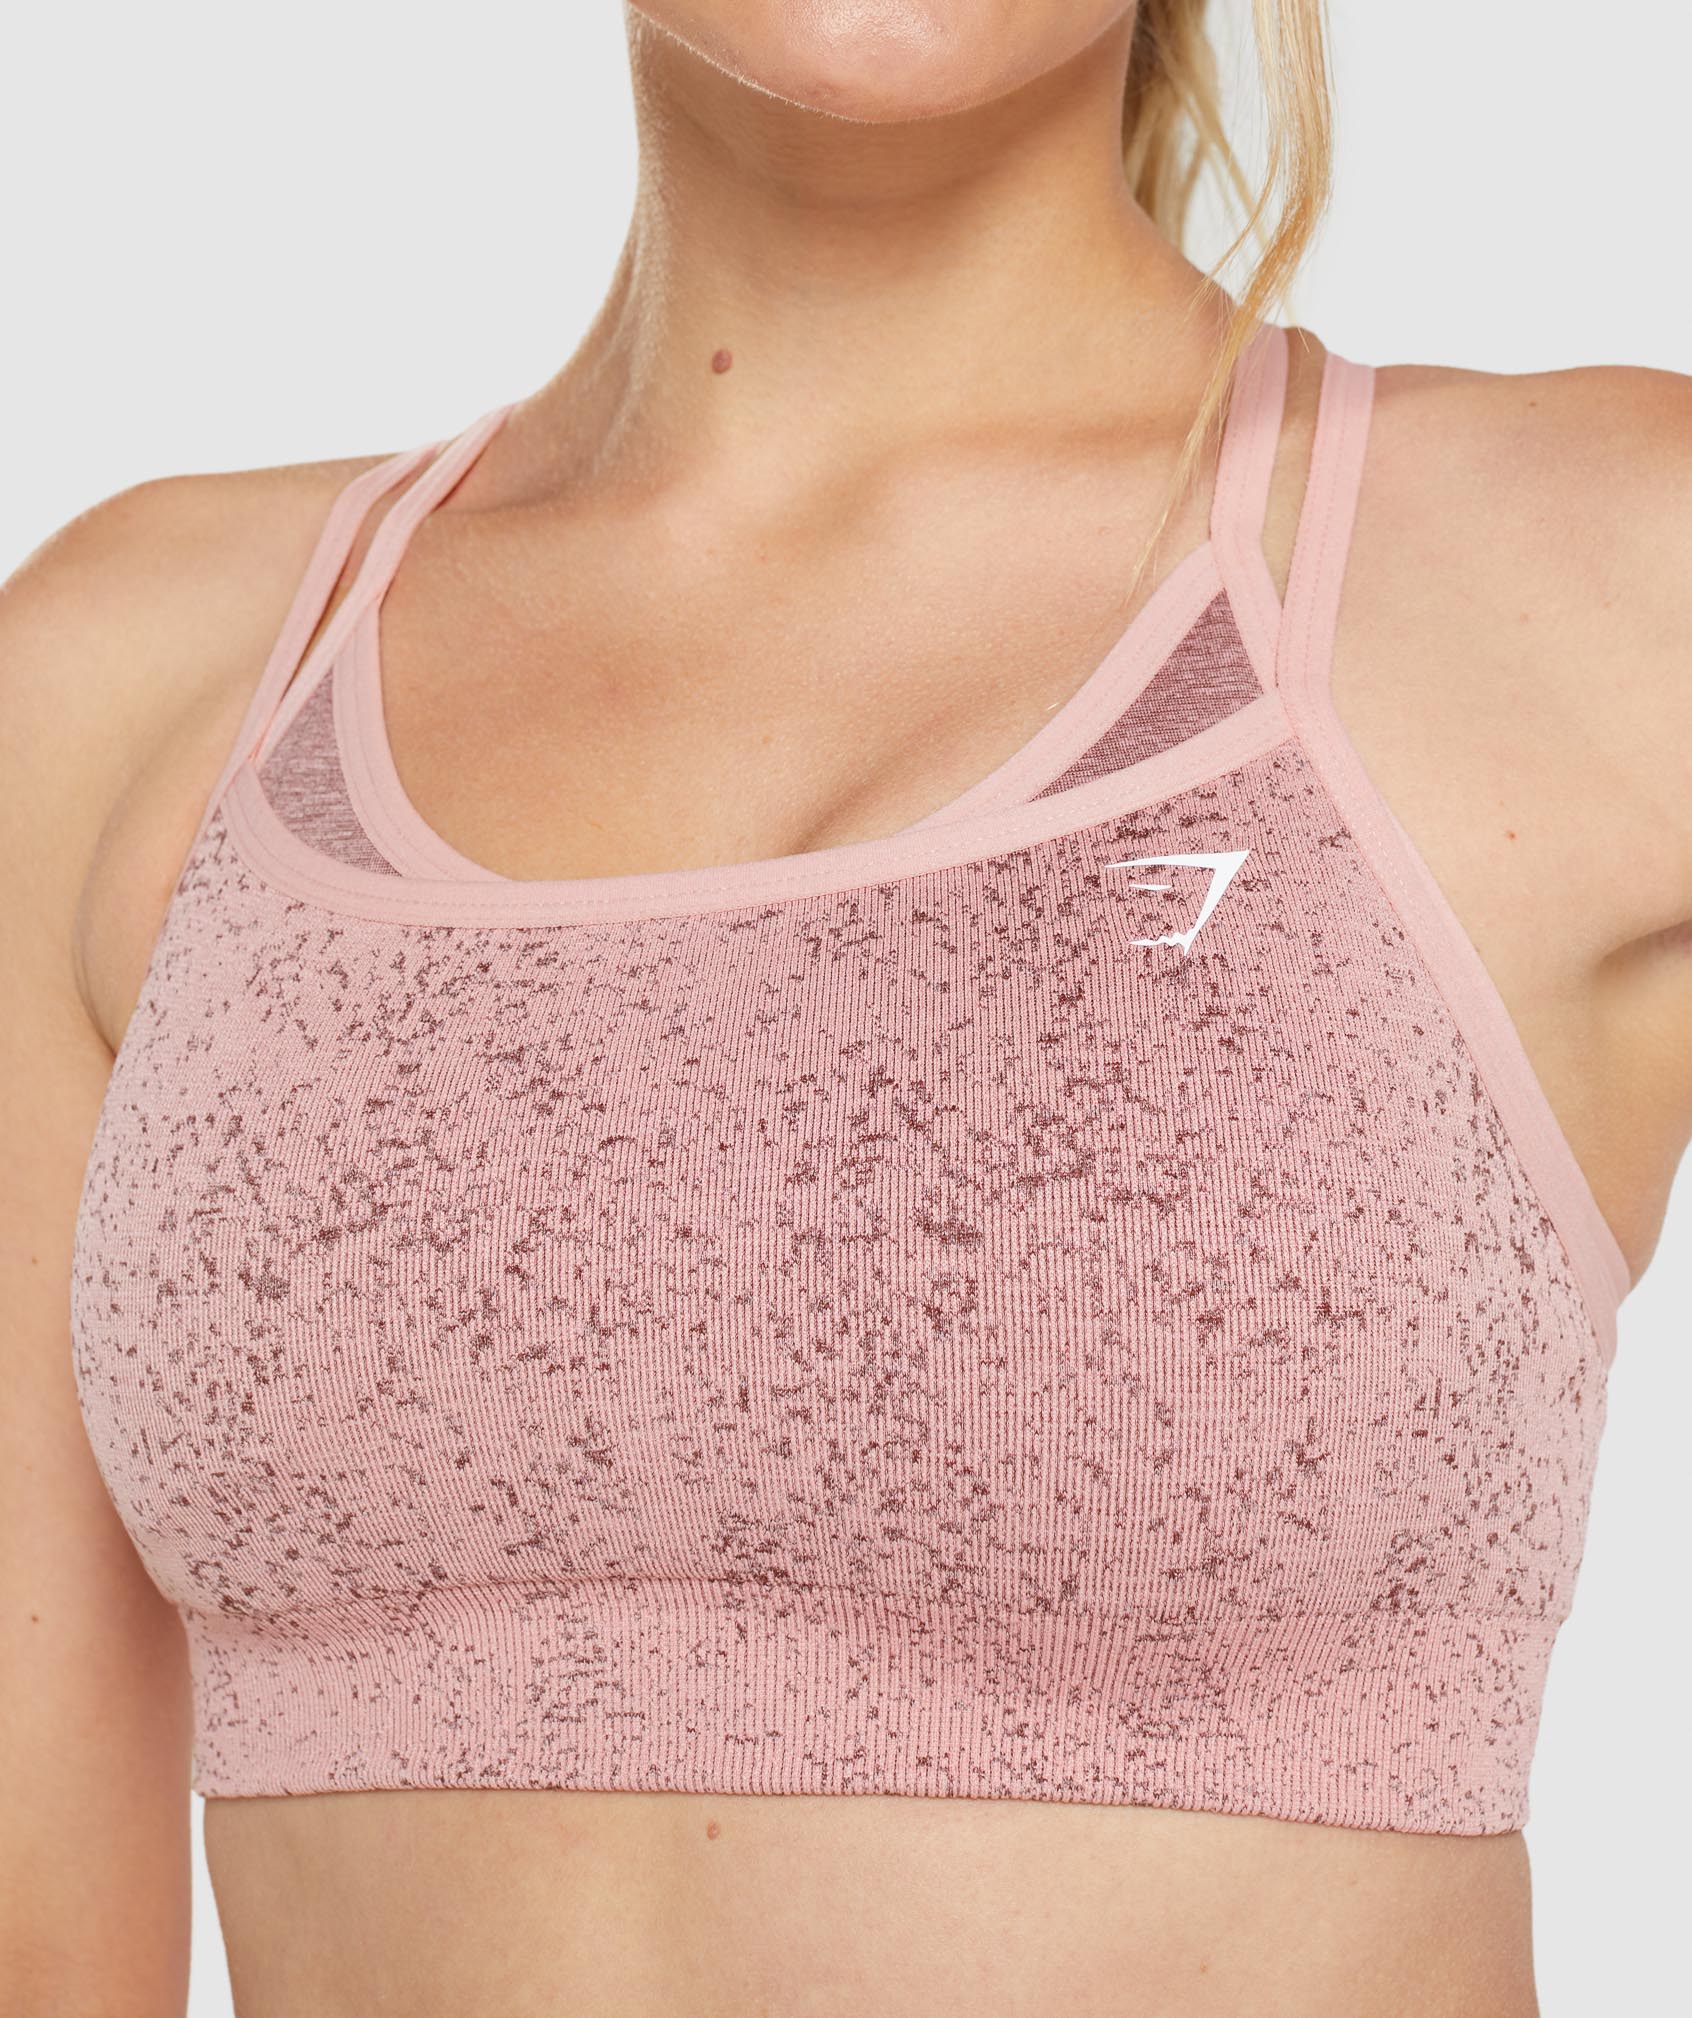 Adapt Fleck Seamless Sports Bra in Mineral | Paige Pink - view 6